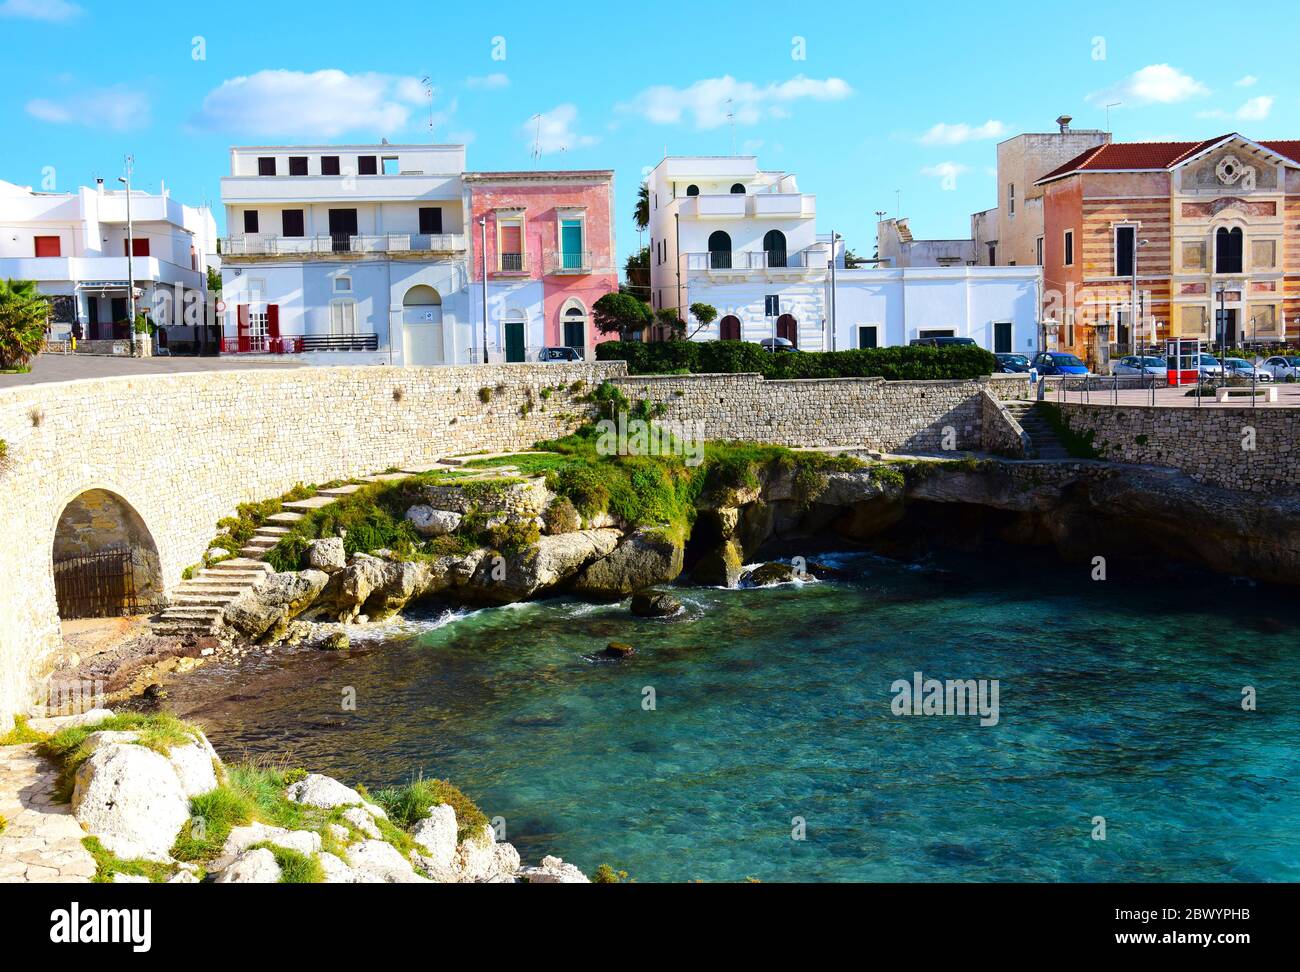 Crystalline water by the town of Santa Maria al Bagno Stock Photo - Alamy